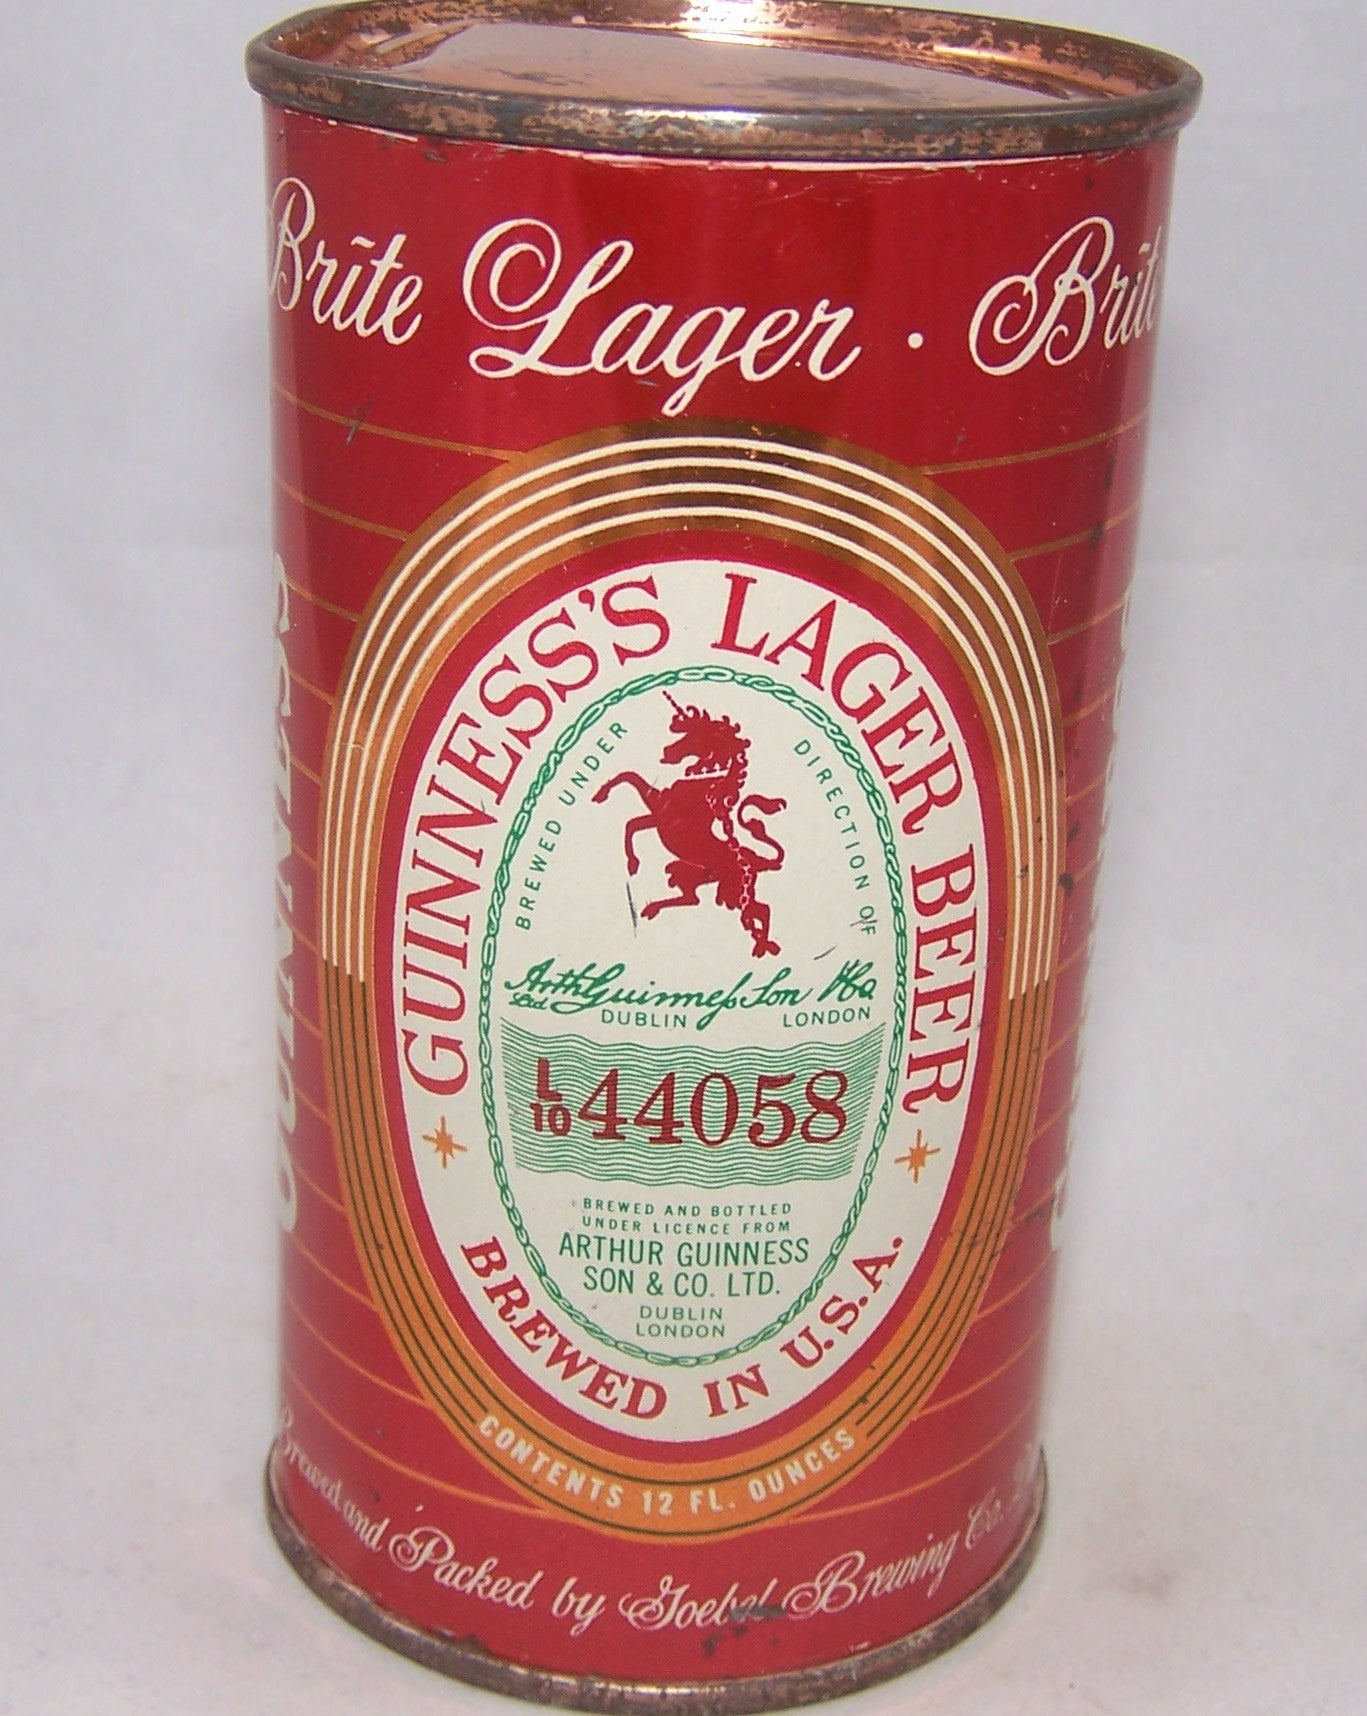 Guinness's Lager Beer (44058) USBC Not Listed, Grade 1 to 1/1+ Sold on 03/19/17